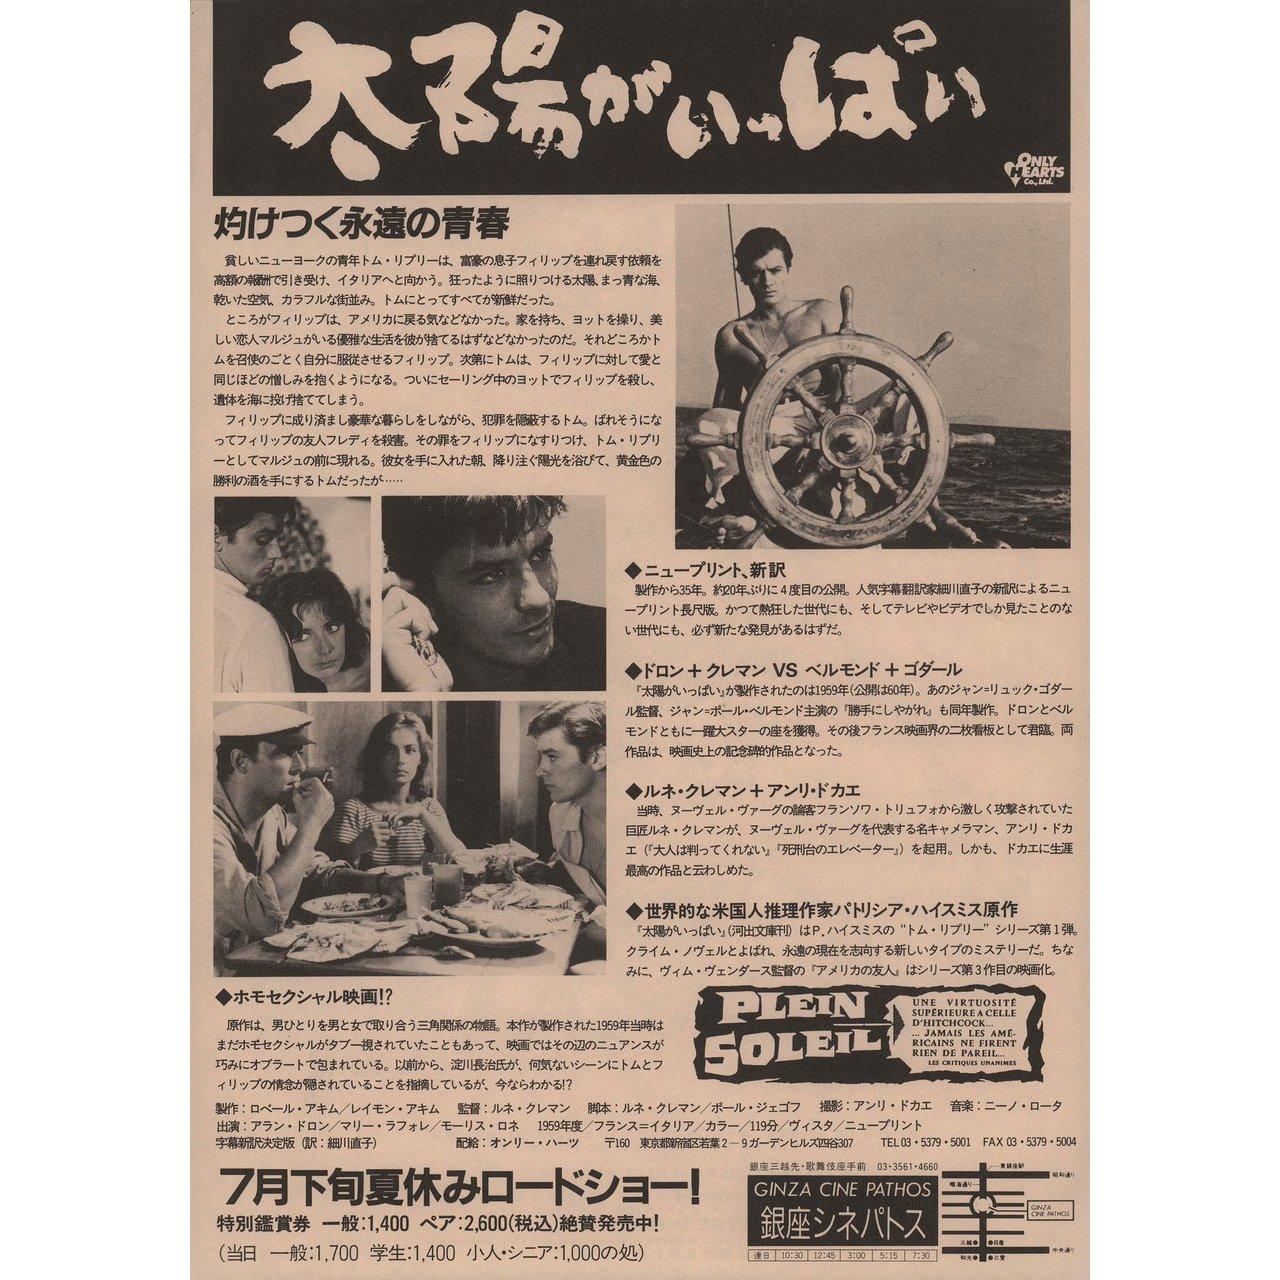 Original 1970s re-release Japanese B5 chirashi flyer for the 1960 film Purple Noon (Plein soleil) directed by Rene Clement with Alain Delon / Maurice Ronet / Marie Laforet / Erno Crisa. Fine condition, rolled. Please note: the size is stated in